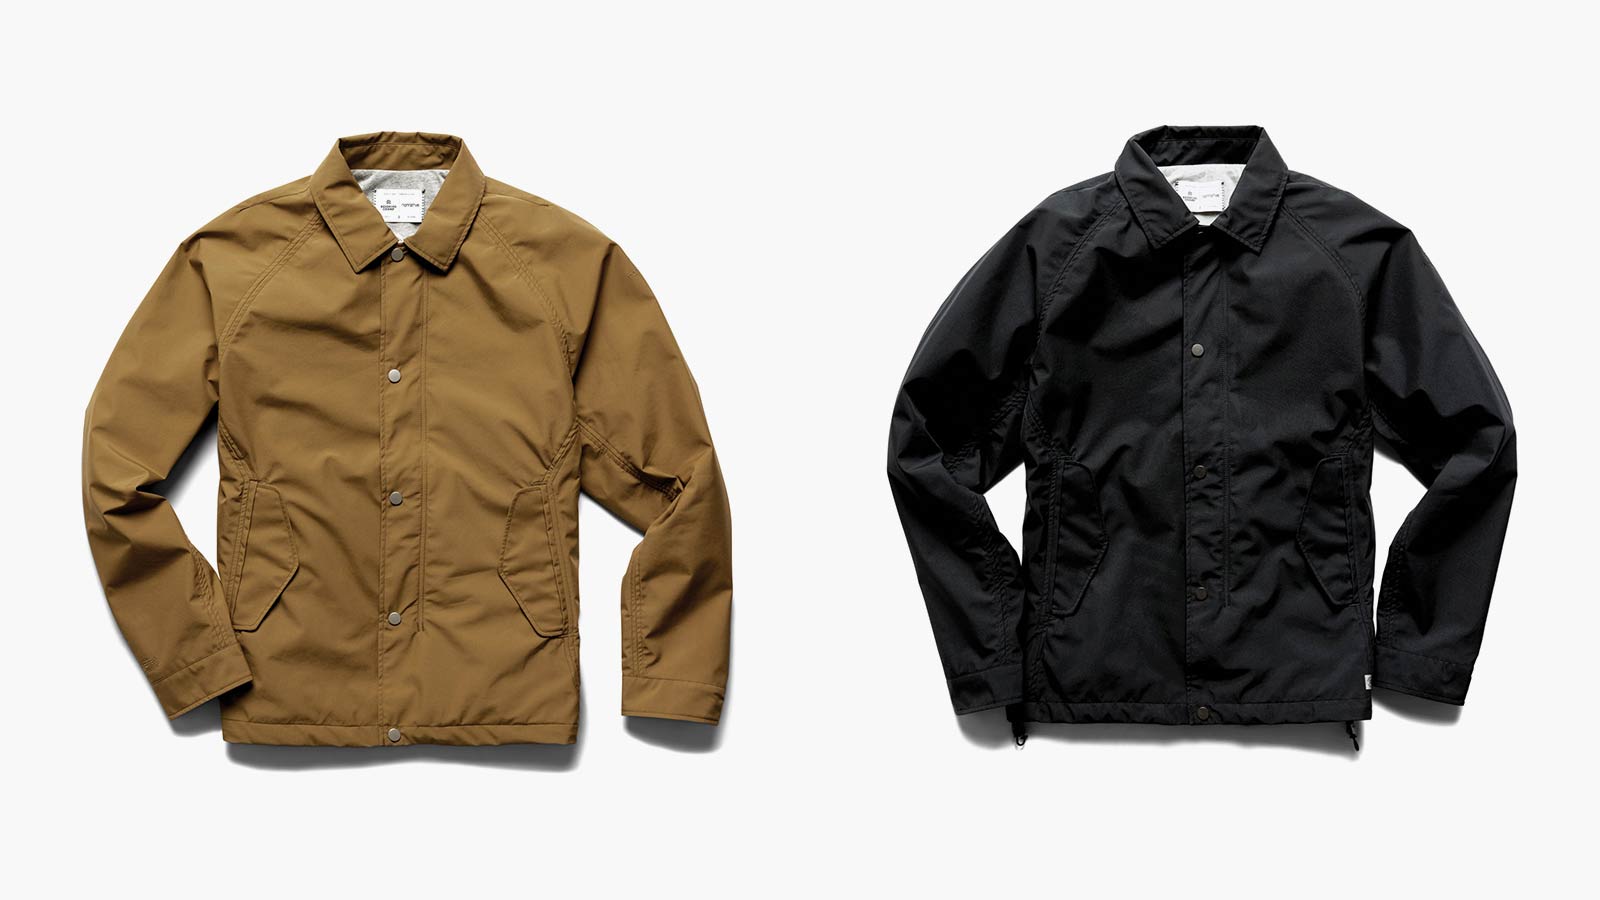 Reigning Champ and nonnative Collaborate For A Street-Ready Fall